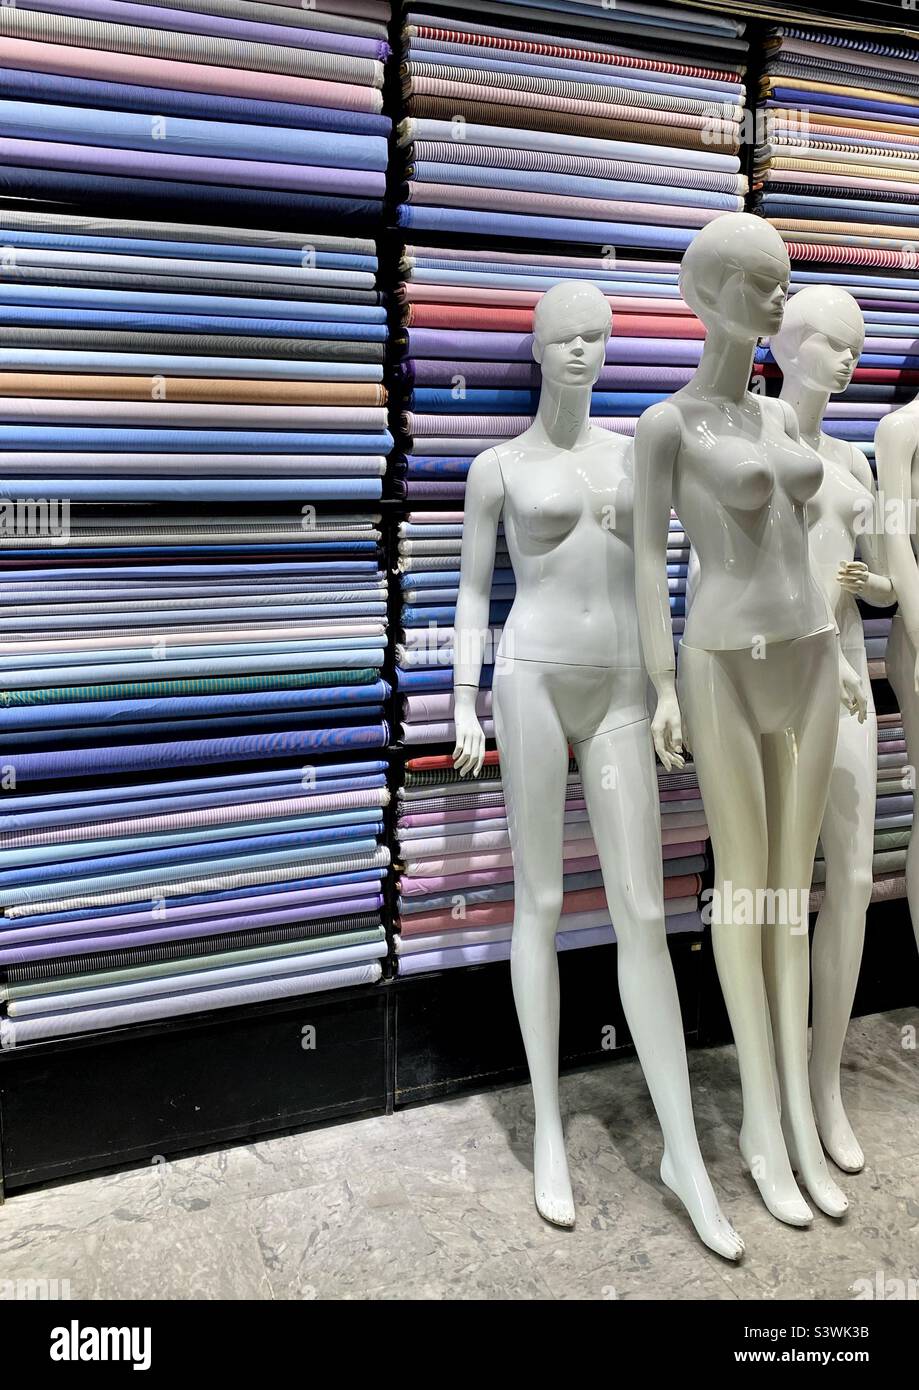 Fabric and mannequins Stock Photo